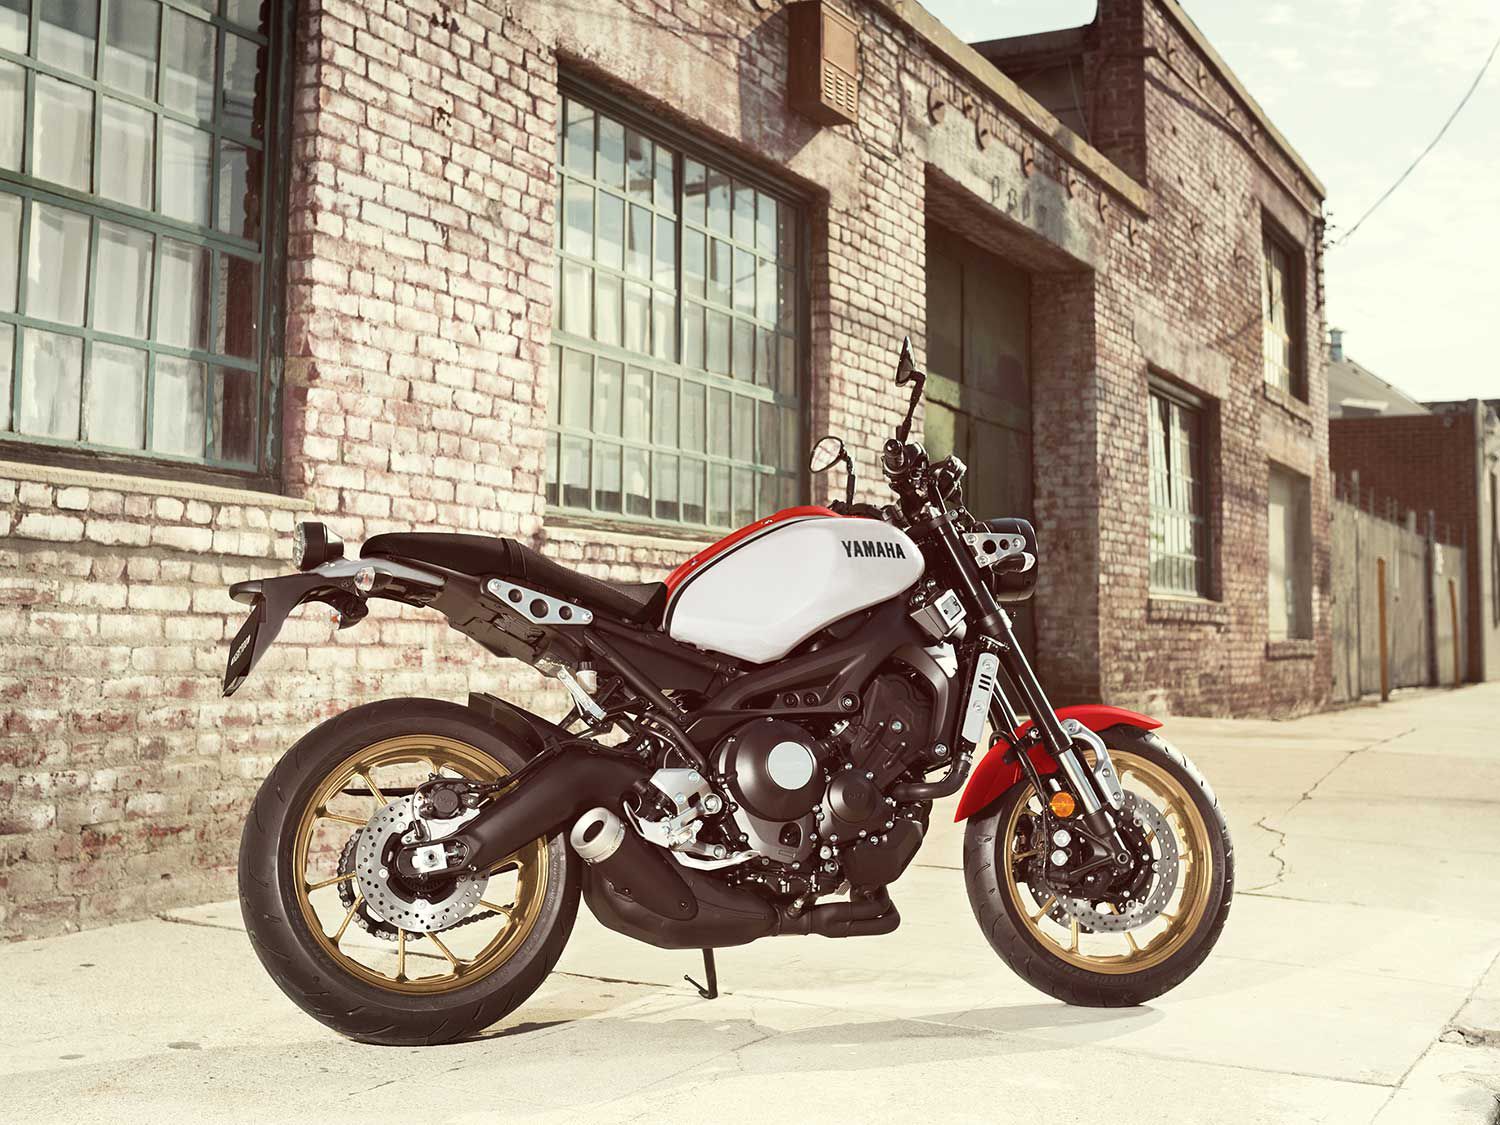 2020 Yamaha Xsr900 Preview Motorcyclist